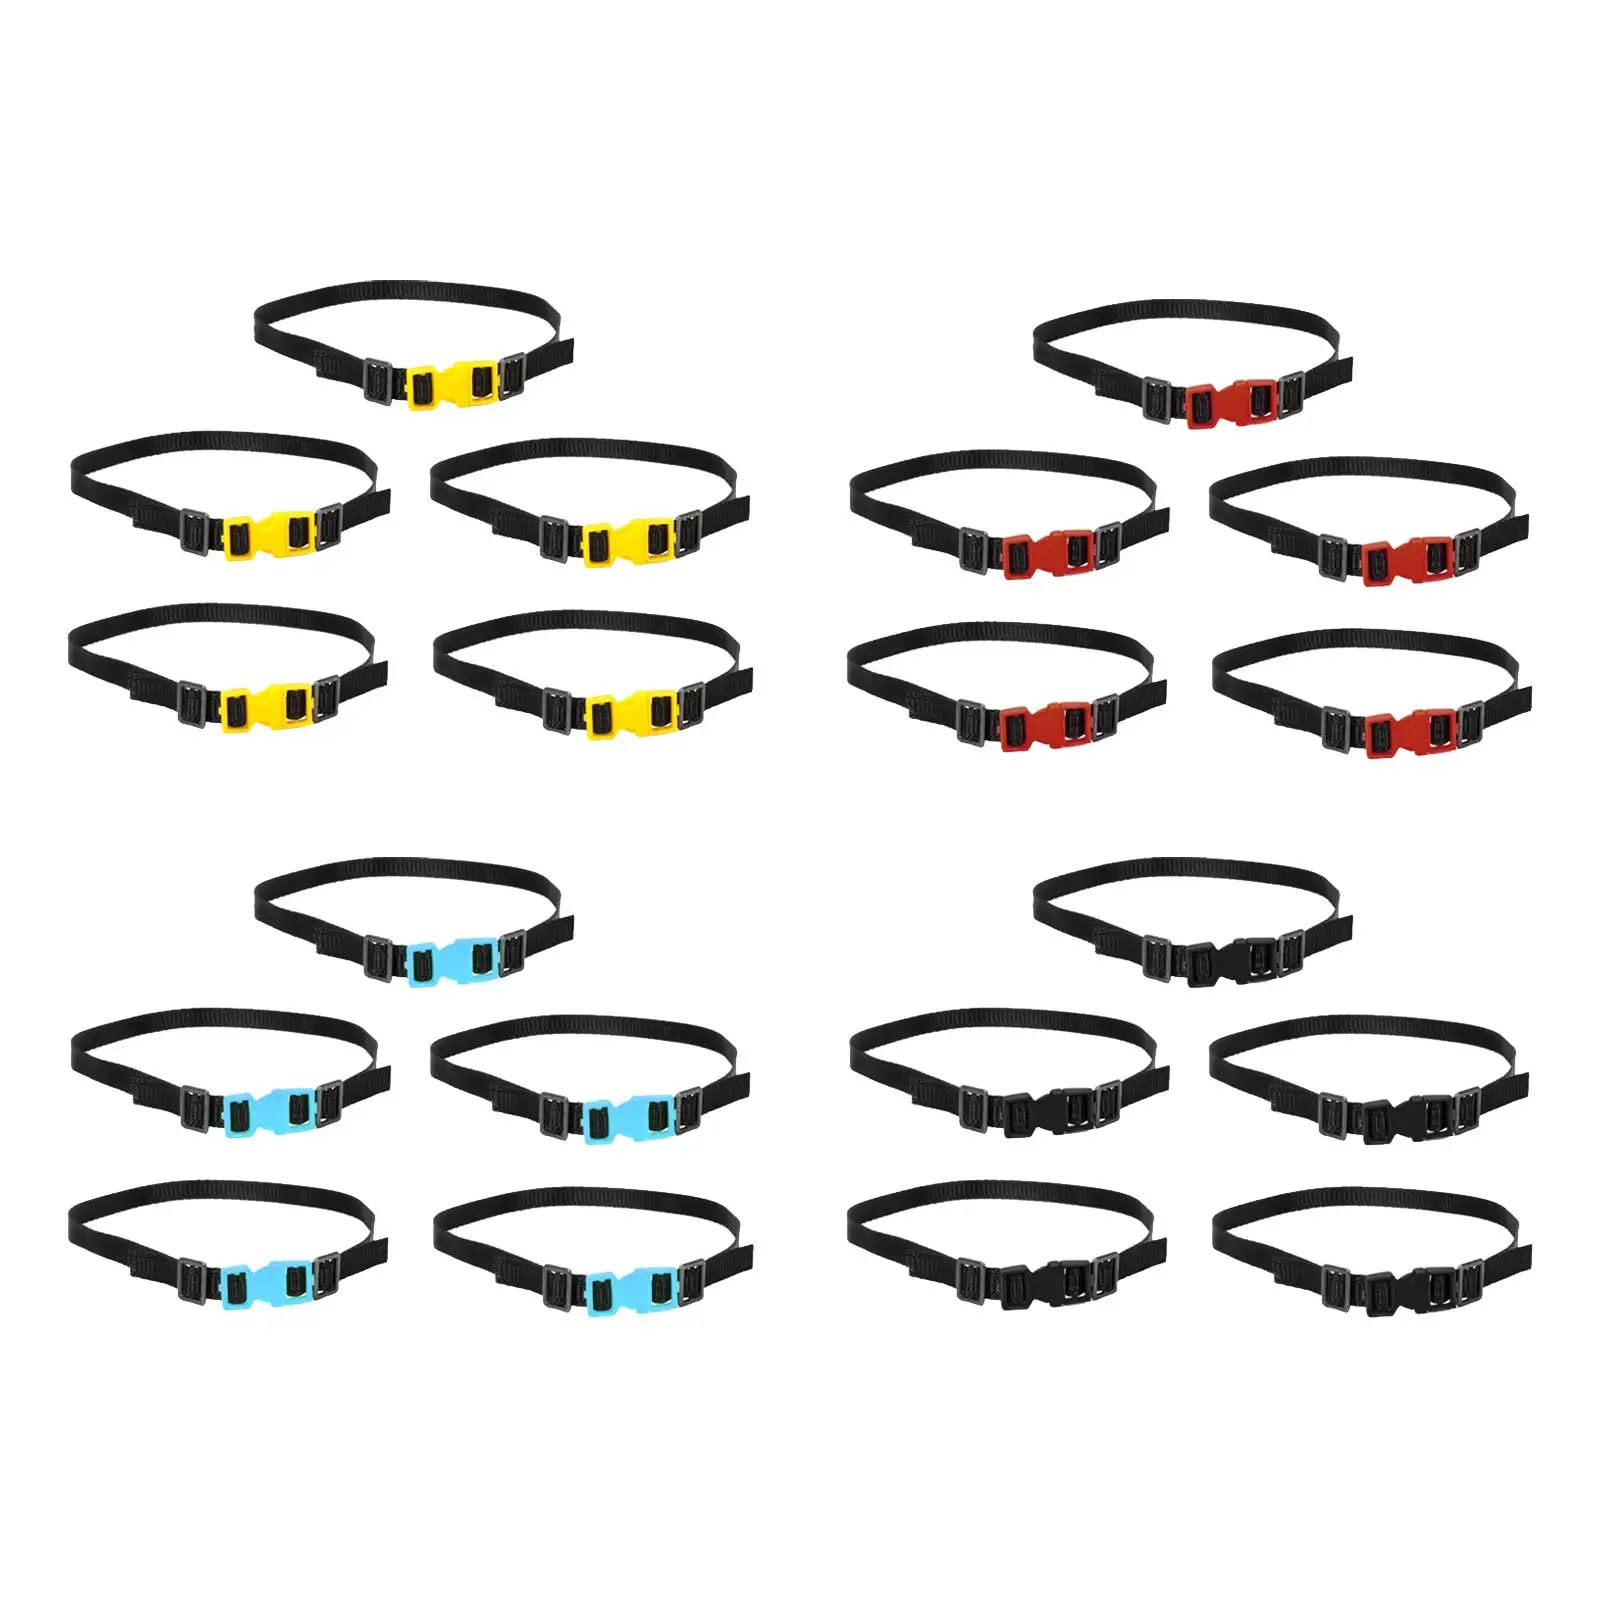 5x 1:10 Scale RC Car Roof Luggage Rack Rope RC Luggage Cord Rope for SCX10 D90 DIY Modified